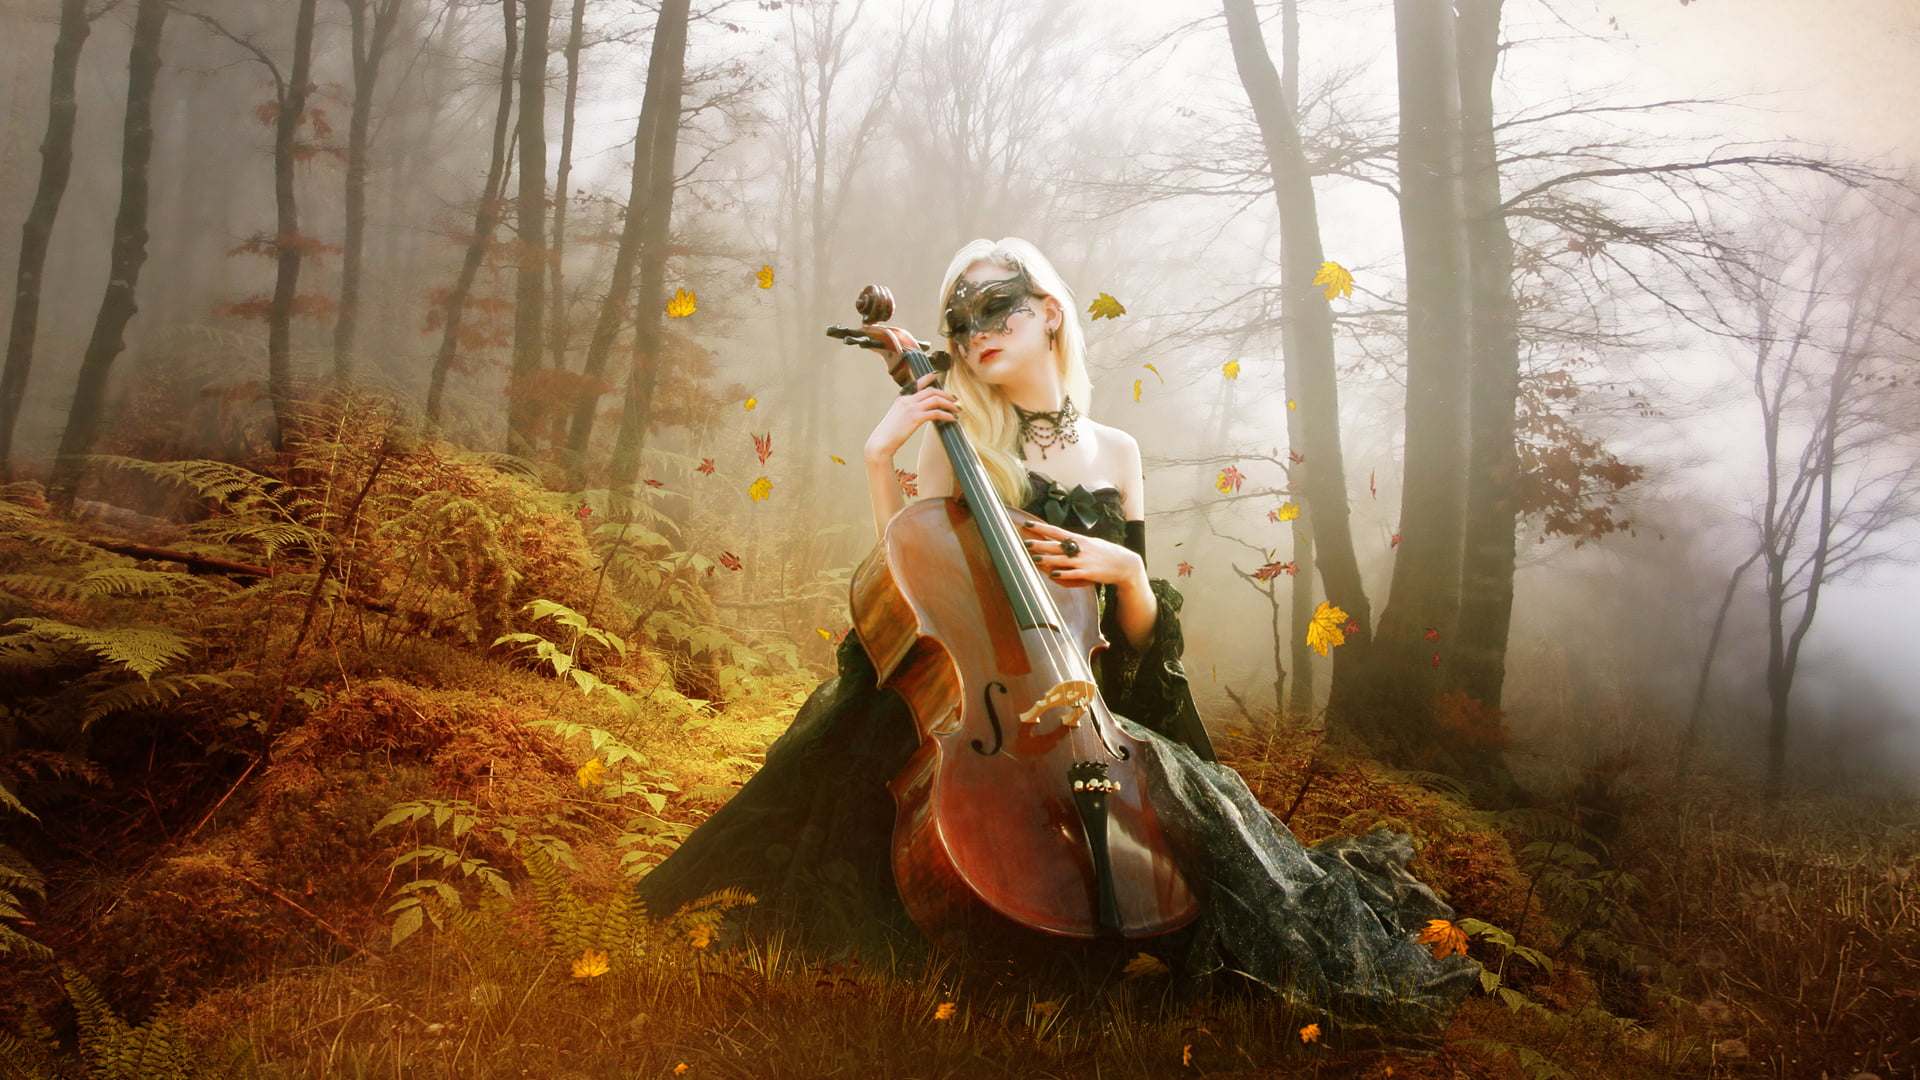 brown cello, autumn, forest, leaves, girl, trees, bass, plant